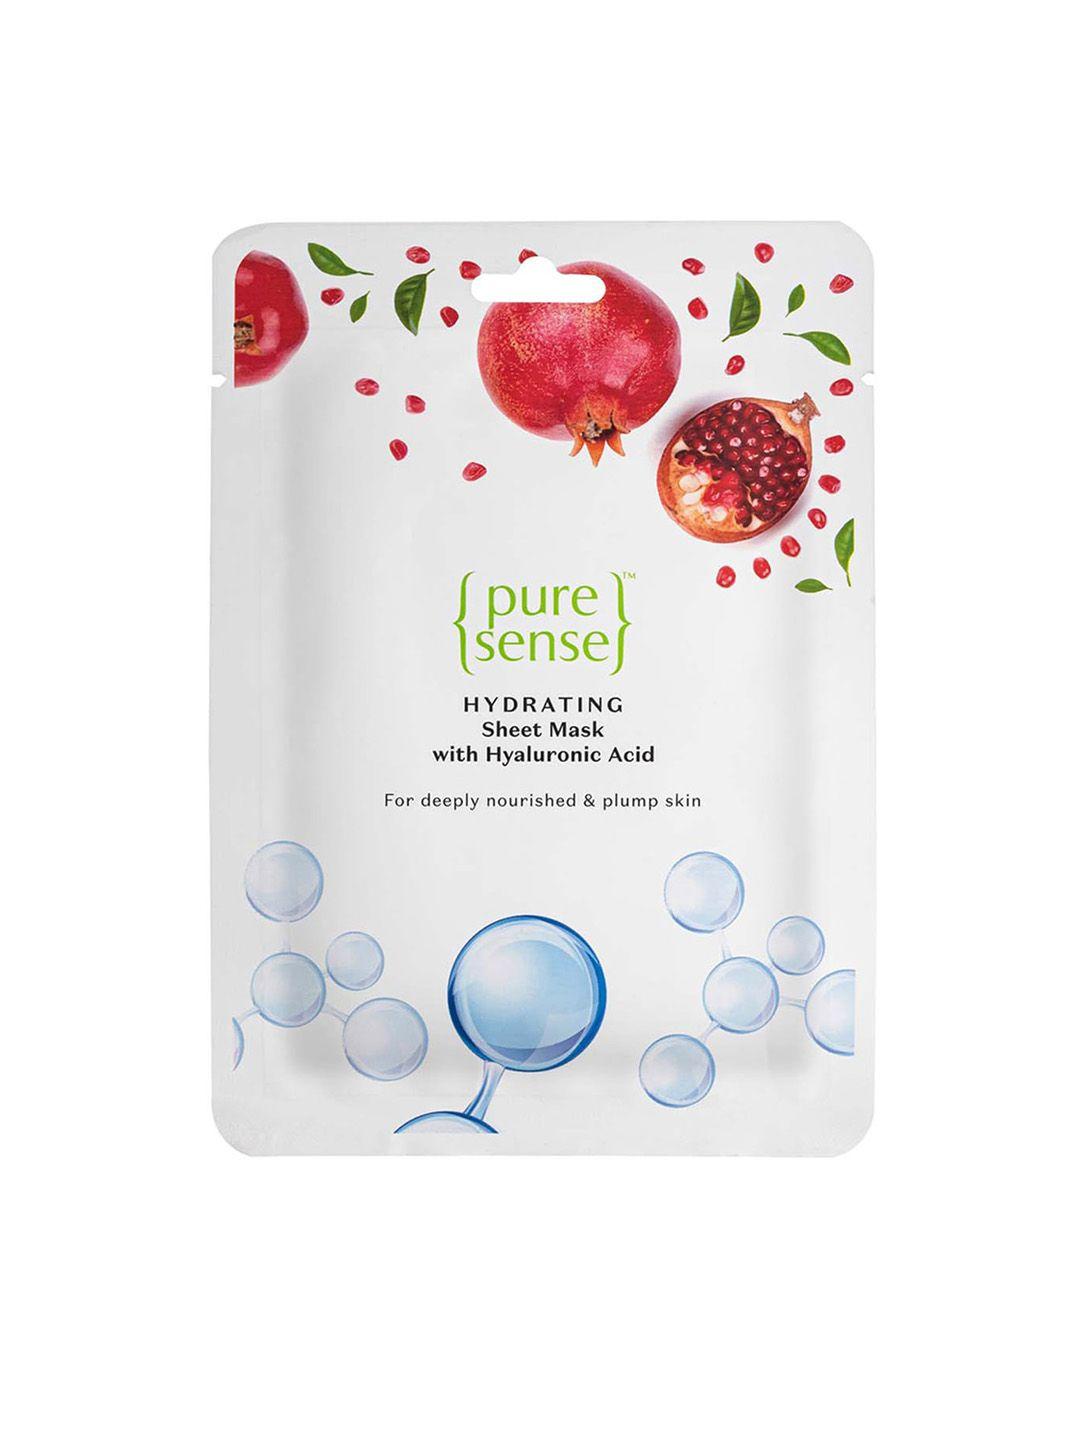 pure sense hydrating sheet mask with hyaluronic acid for nourished & plump skin - 15g